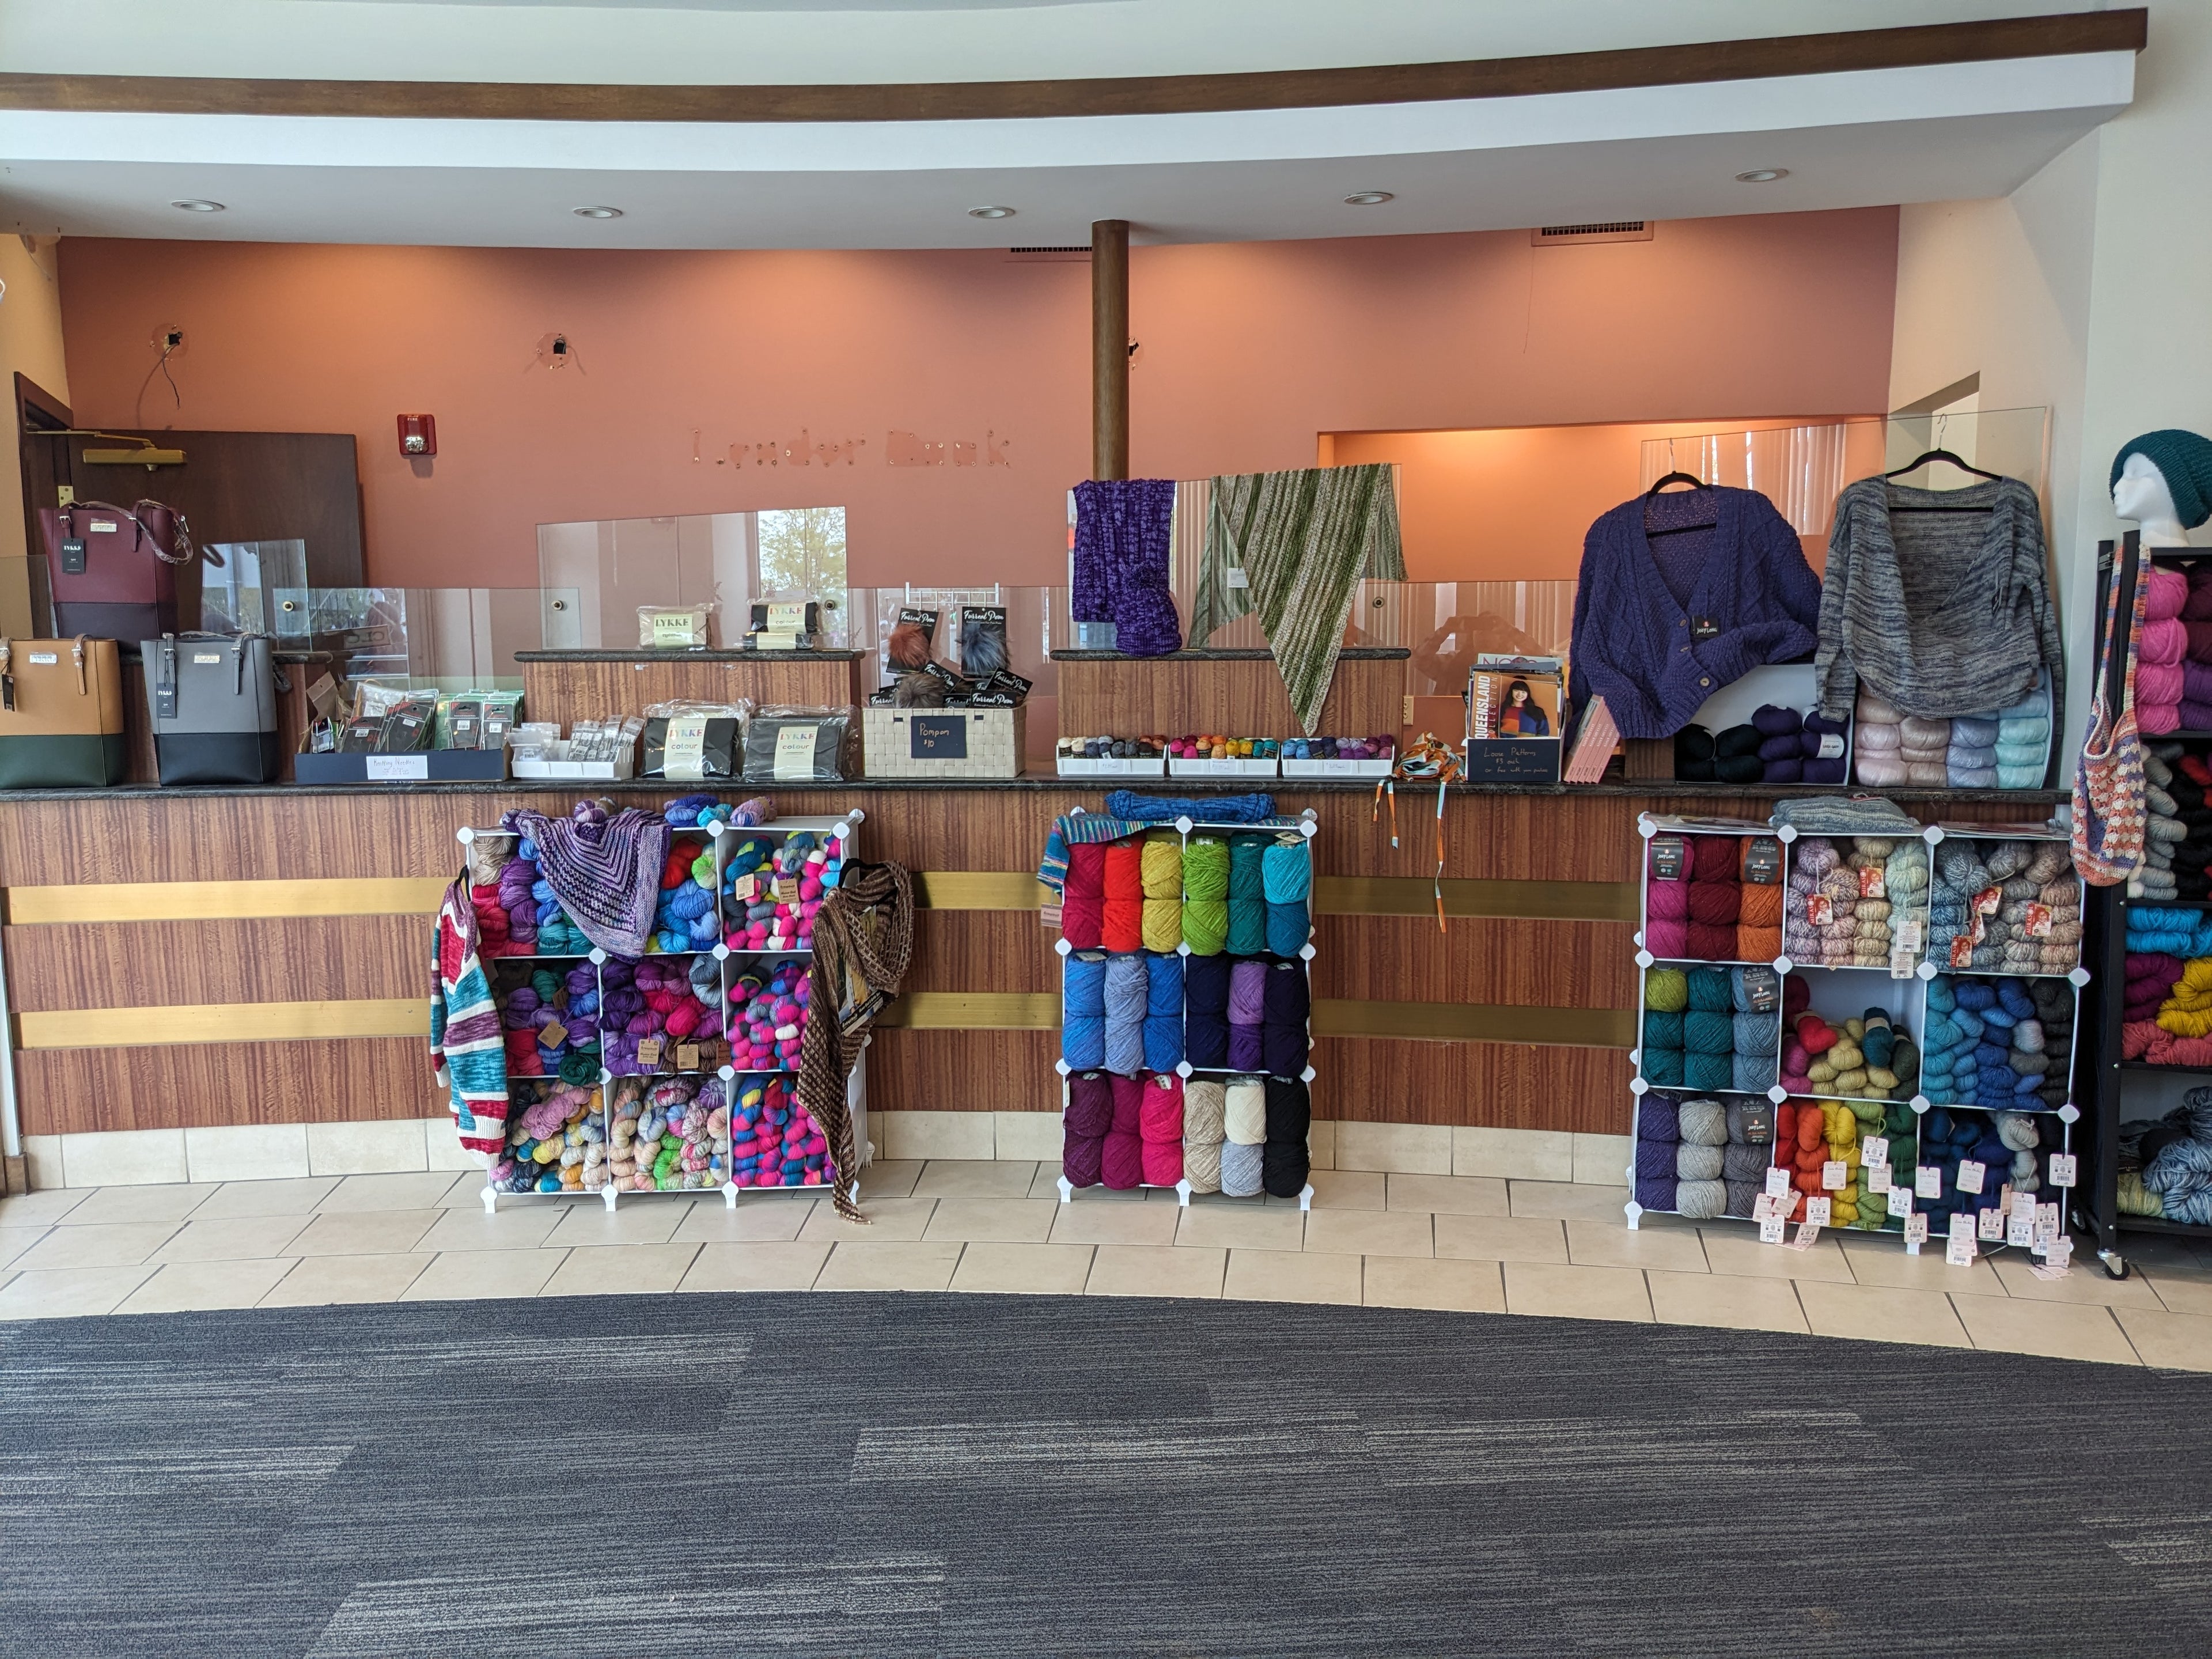 Image of Mind's Eye Yarn's current location. Shelves of yarn stacked neatly against a bank's teller windows.